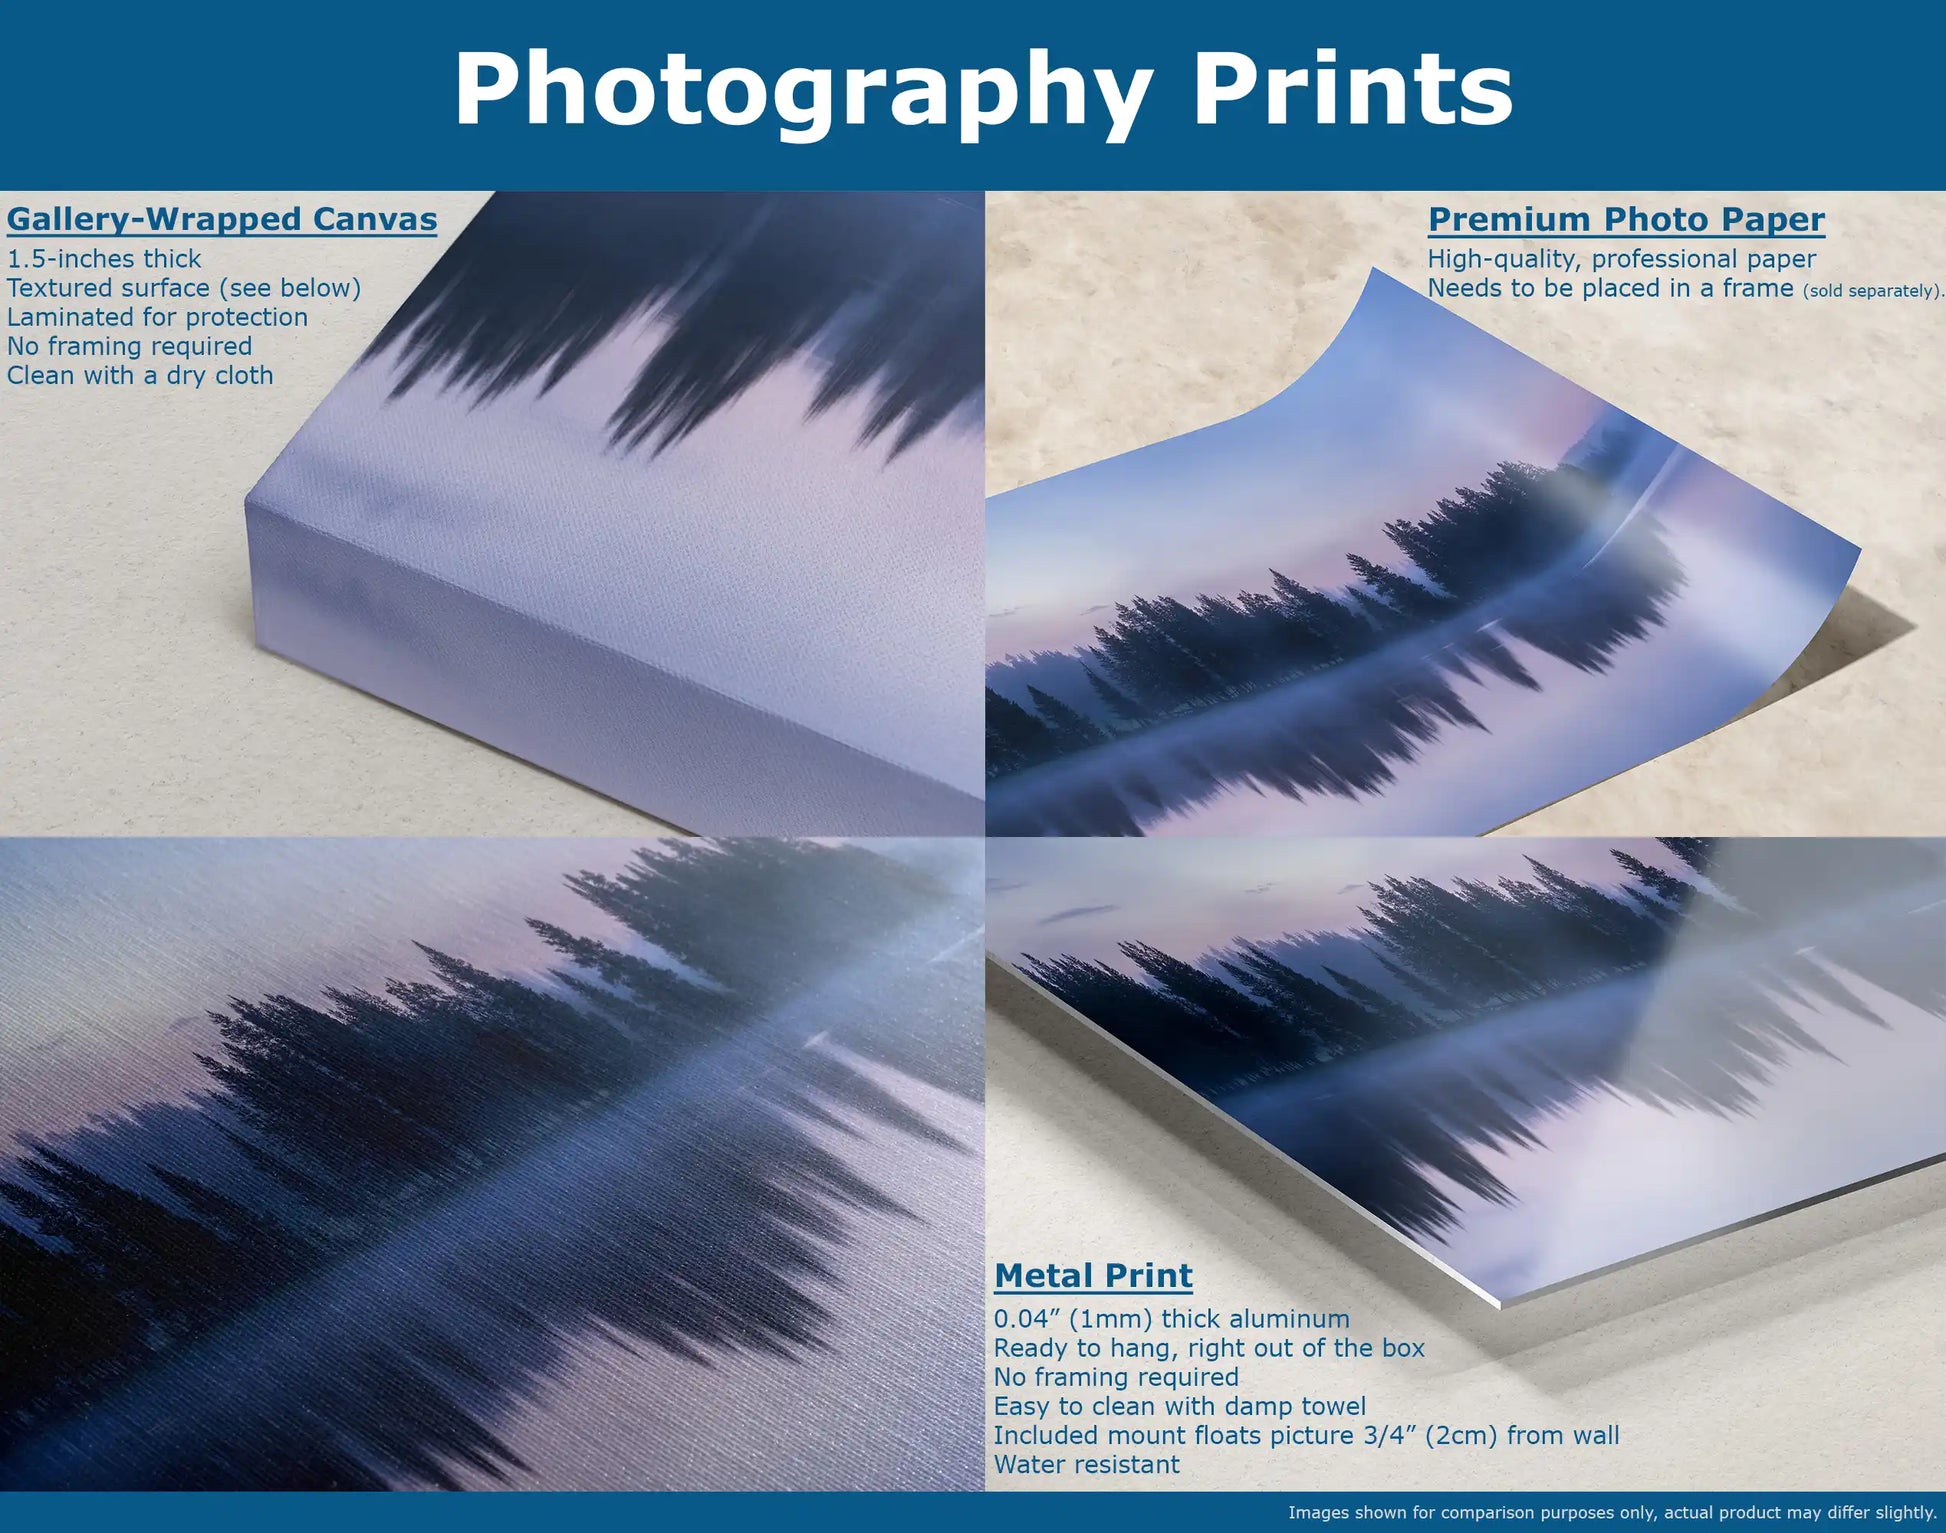 An explainer image comparing gallery-wrapped canvas, premium photo paper, and metal print mediums of a photograph Yellowstone Lake reflection at twilight.